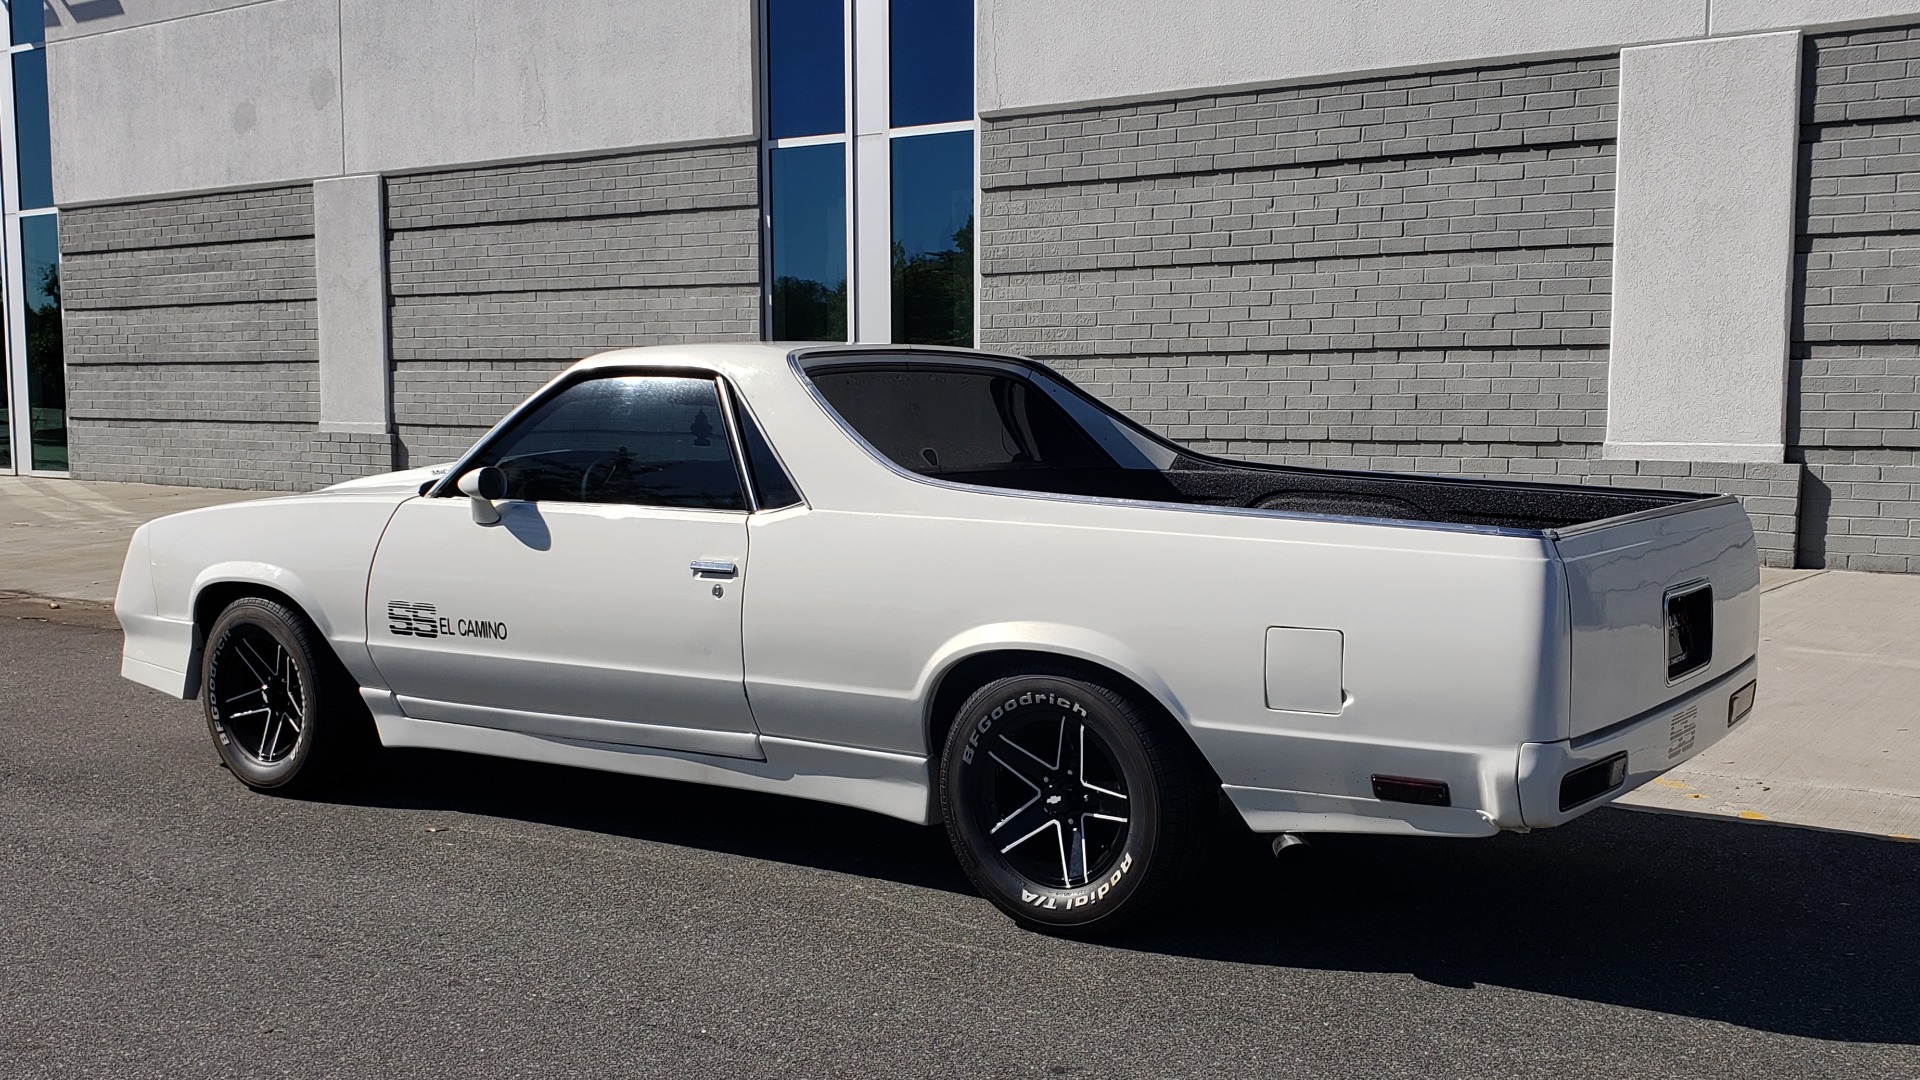 Used 1979 Chevrolet EL CAMINO SS / NEW 350 V8 / AUTO / COWL HOOD / CUSTOM SOUND / FLOWMASTERS for sale Sold at Formula Imports in Charlotte NC 28227 9